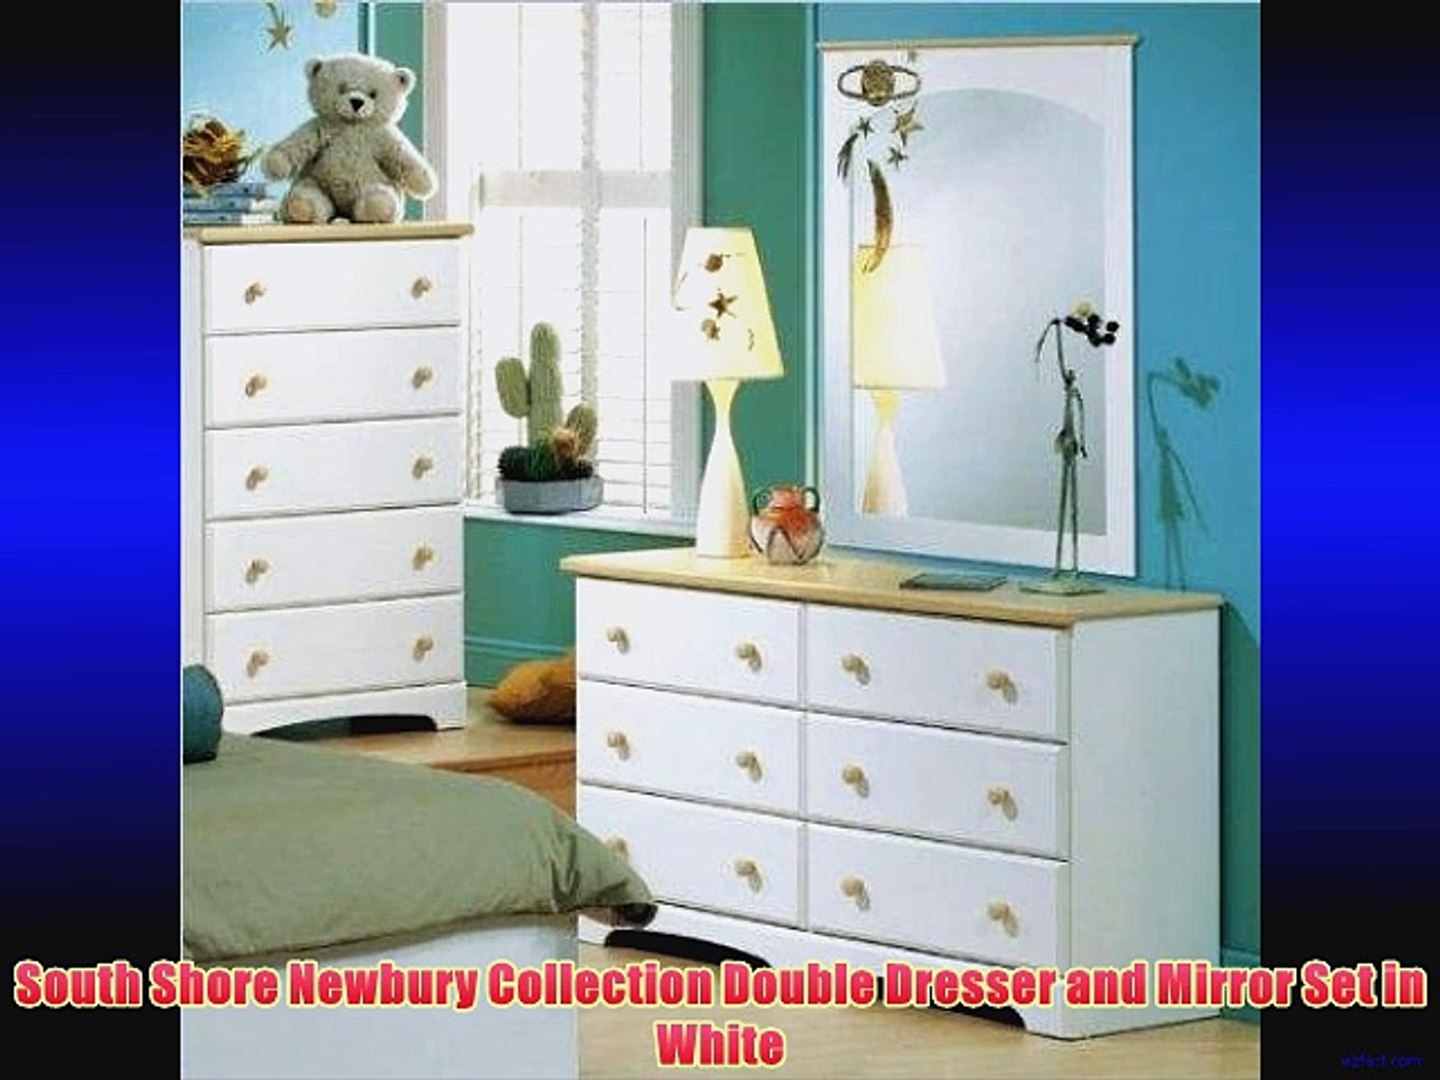 South Shore Newbury Collection Double Dresser And Mirror Set In